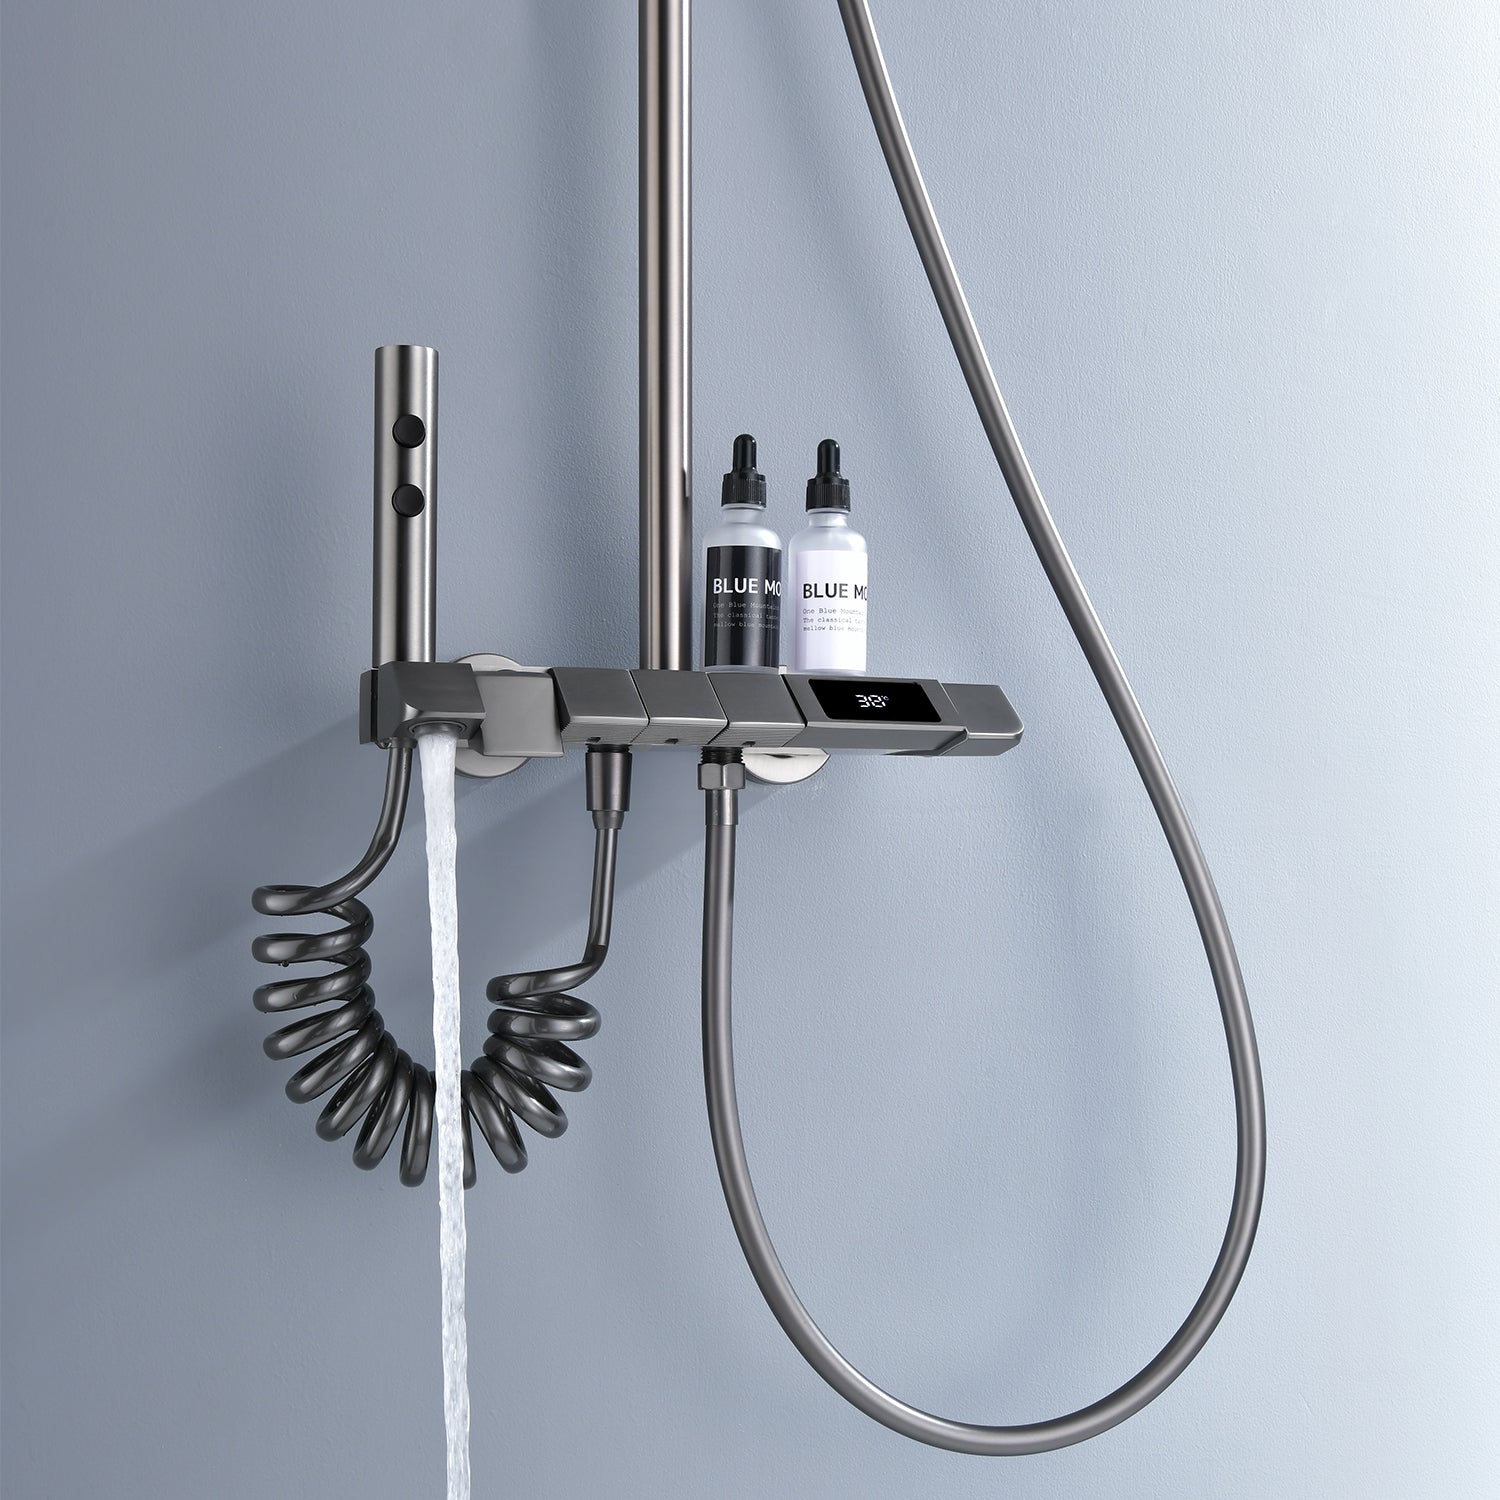 Lefton Thermostatic Shower System with Temperature Display and 4 Water Outlet Modes-SST2202